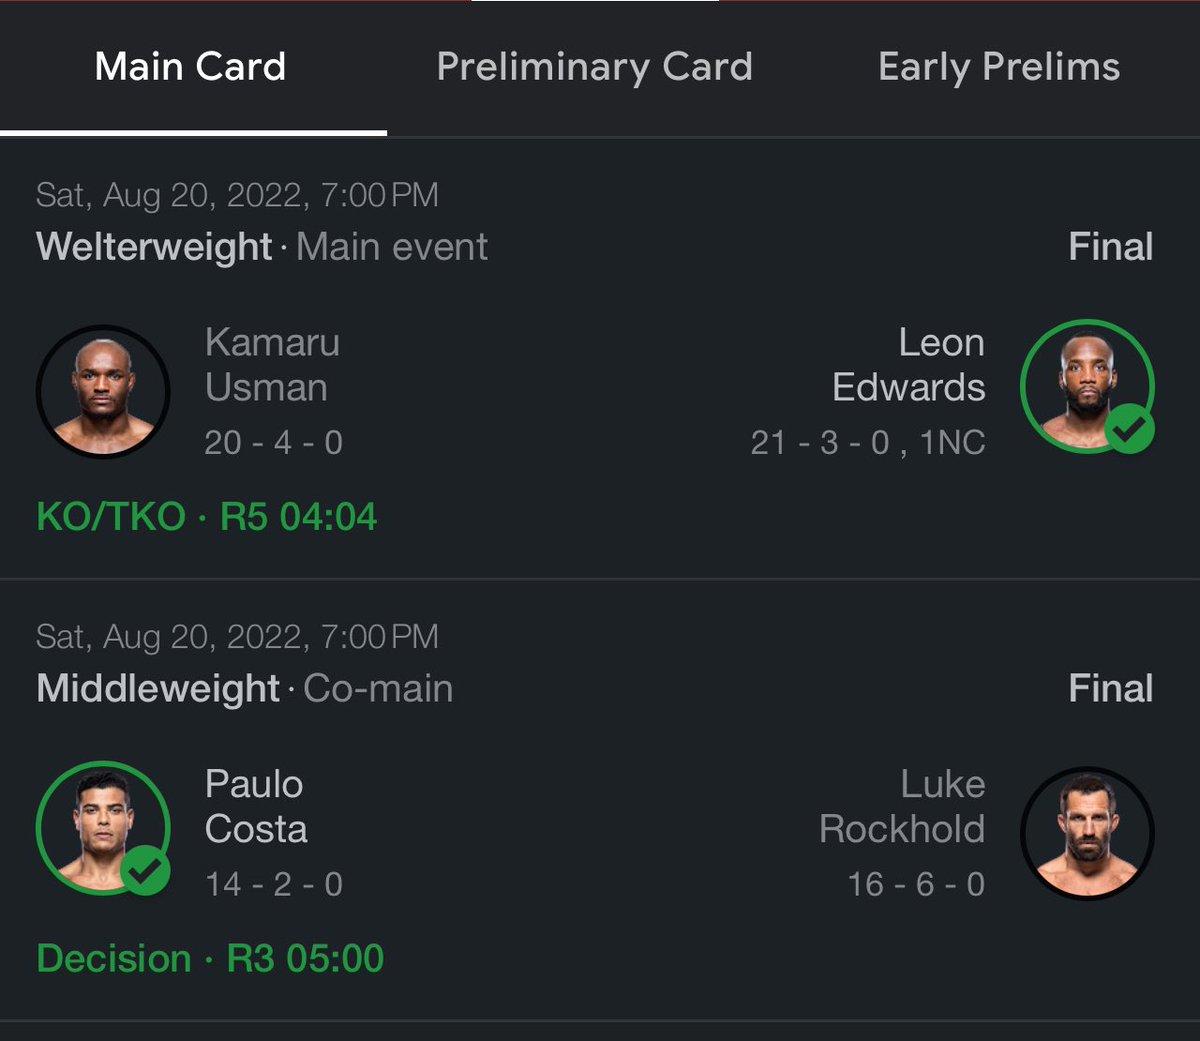 At the #WorldMMAAwards tonight Leon Edwards won the award for “Knockout Of The Year” for 2023 for his headkick KO over Kamaru at #UFC278. That being said, #UFC296 is this week and the awards are in the span of a year. UFC 278 was last August. Not questionable at all #MMATwitter